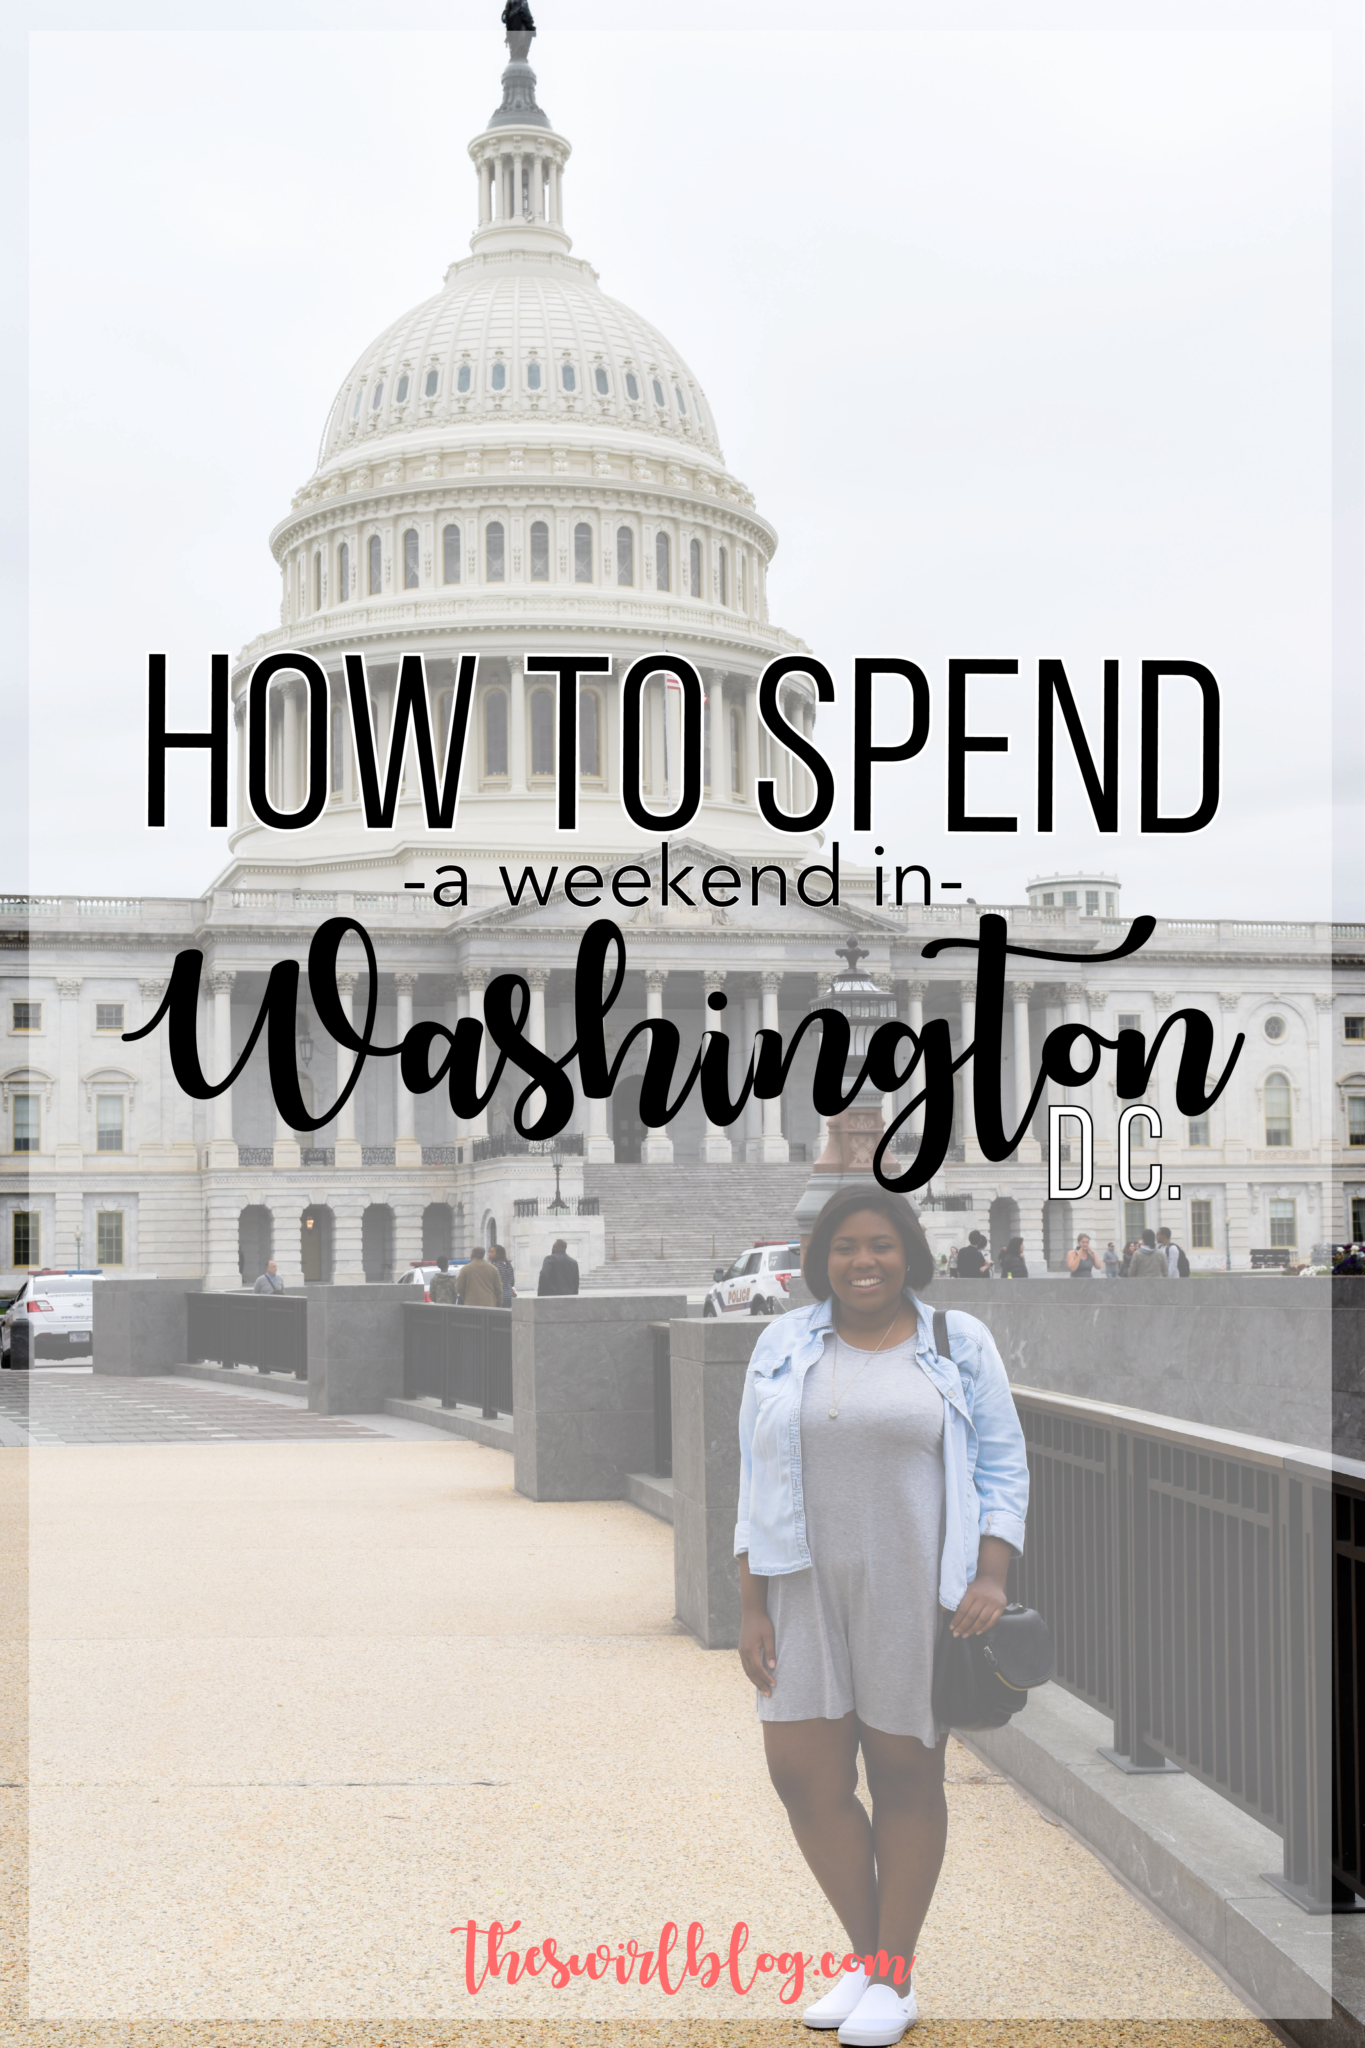 My Travel Diary: How To Spend a Weekend in D.C.